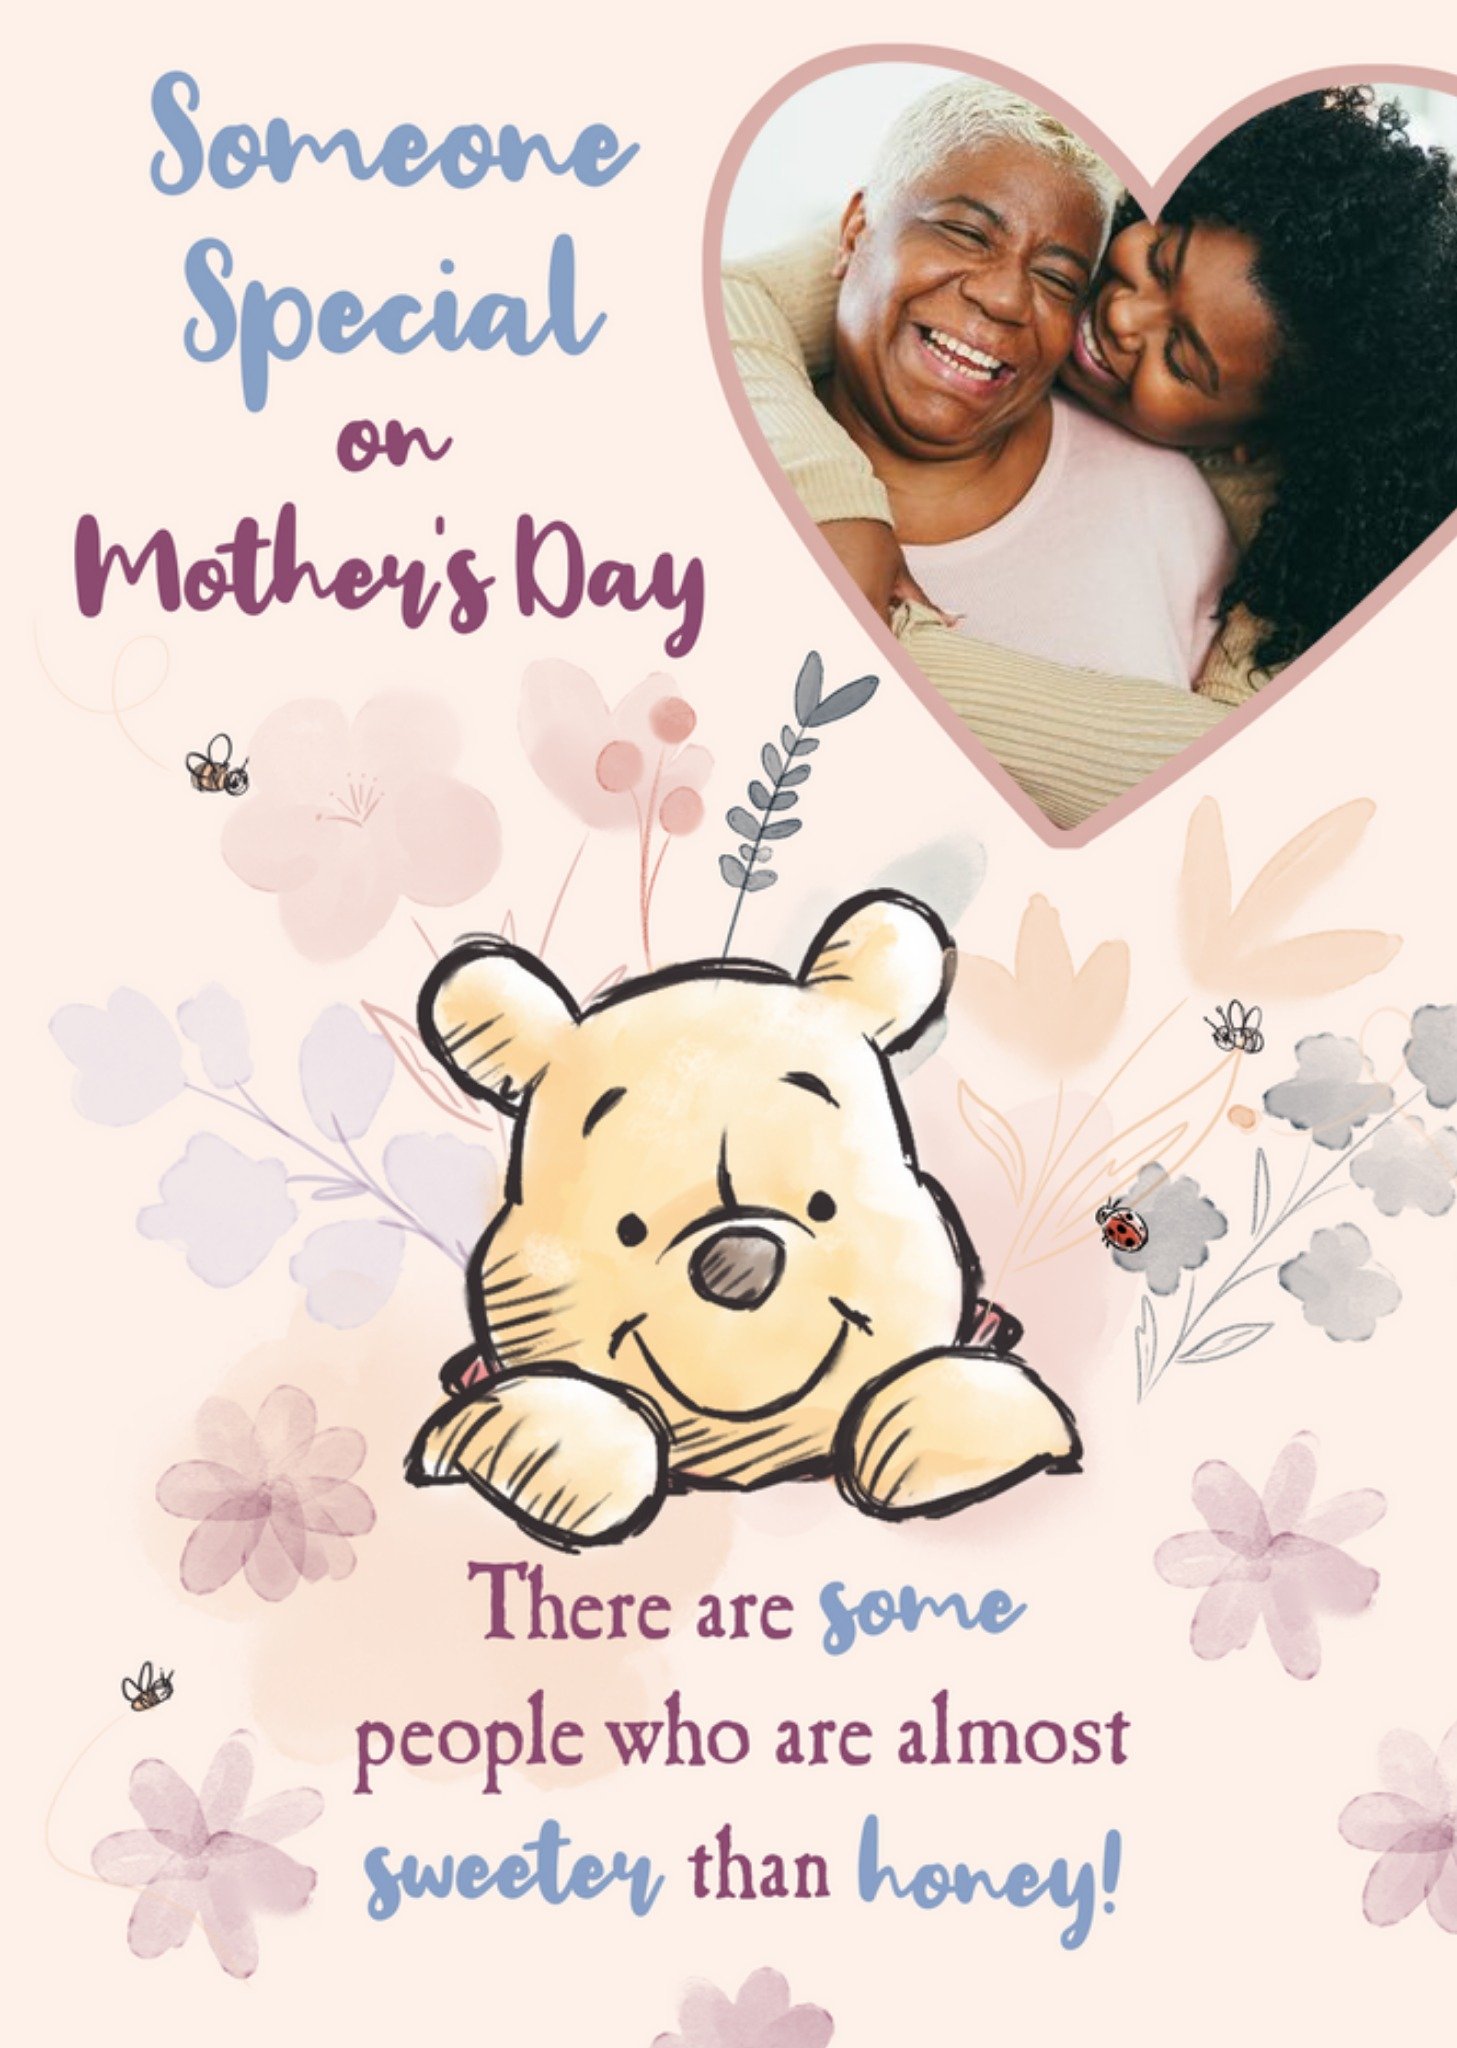 Winnie The Pooh Sweeter Than Honey Photo Upload Mother's Day Card Ecard